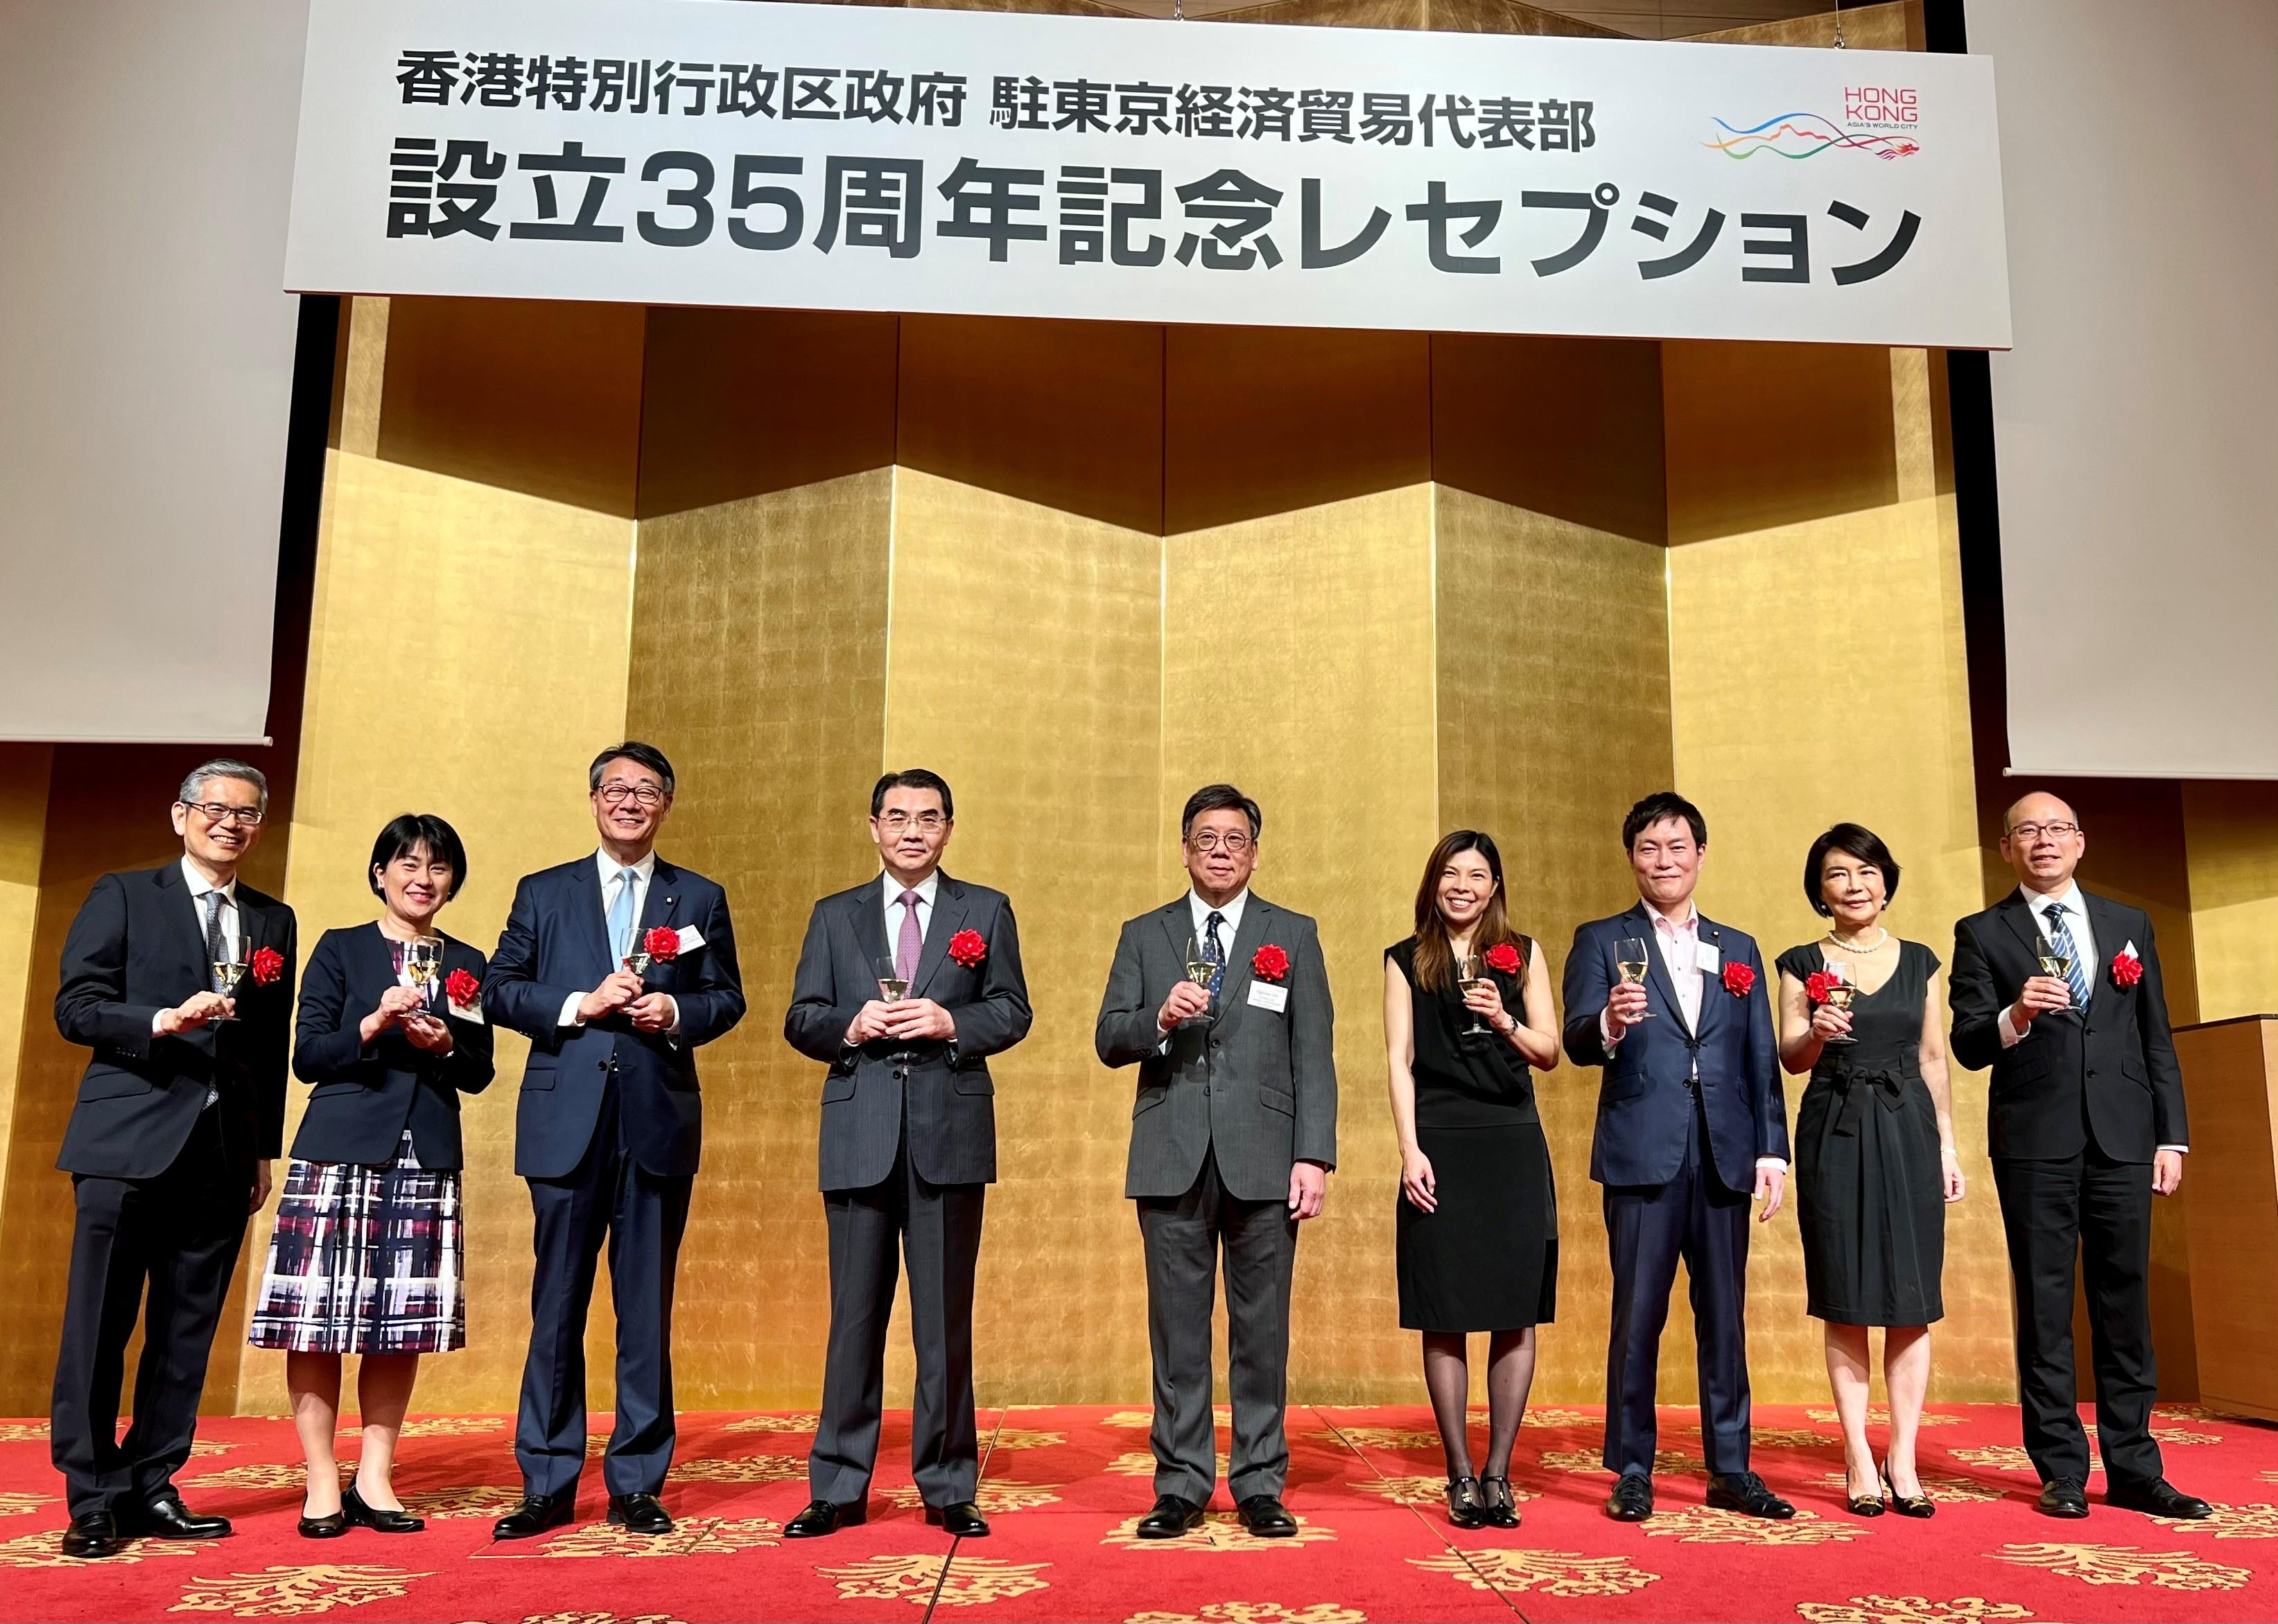 The Secretary for Commerce and Economic Development, Mr Algernon Yau, today (June 19) officiated at a reception to celebrate the 35th anniversary of the establishment of the Hong Kong Economic and Trade Office in Tokyo (Tokyo ETO), during his visit to Tokyo, Japan. Photo shows (from left) the Regional Director of Japan of the Hong Kong Tourism Board, Mr Kazunori Hori; the Head of Business and Talent Attraction/Investment Promotion of Tokyo ETO, Ms Kiyoko Hashiba; the Vice Speaker of the House of Representatives, Japan, Mr Banri Kaieda; the Chinese Ambassador to Japan, Mr Wu Jianghao; Mr Yau; the Principal Hong Kong Economic and Trade Representative (Tokyo), Miss Winsome Au; Parliamentary Vice-Minister for Foreign Affairs, Japan Mr Masatoshi Akimoto; the Chief Operating Officer of the Airport Authority Hong Kong, Mrs Vivian Cheung; and the Director, Japan, of the Hong Kong Trade Development Council, Mr Benjamin Yau.